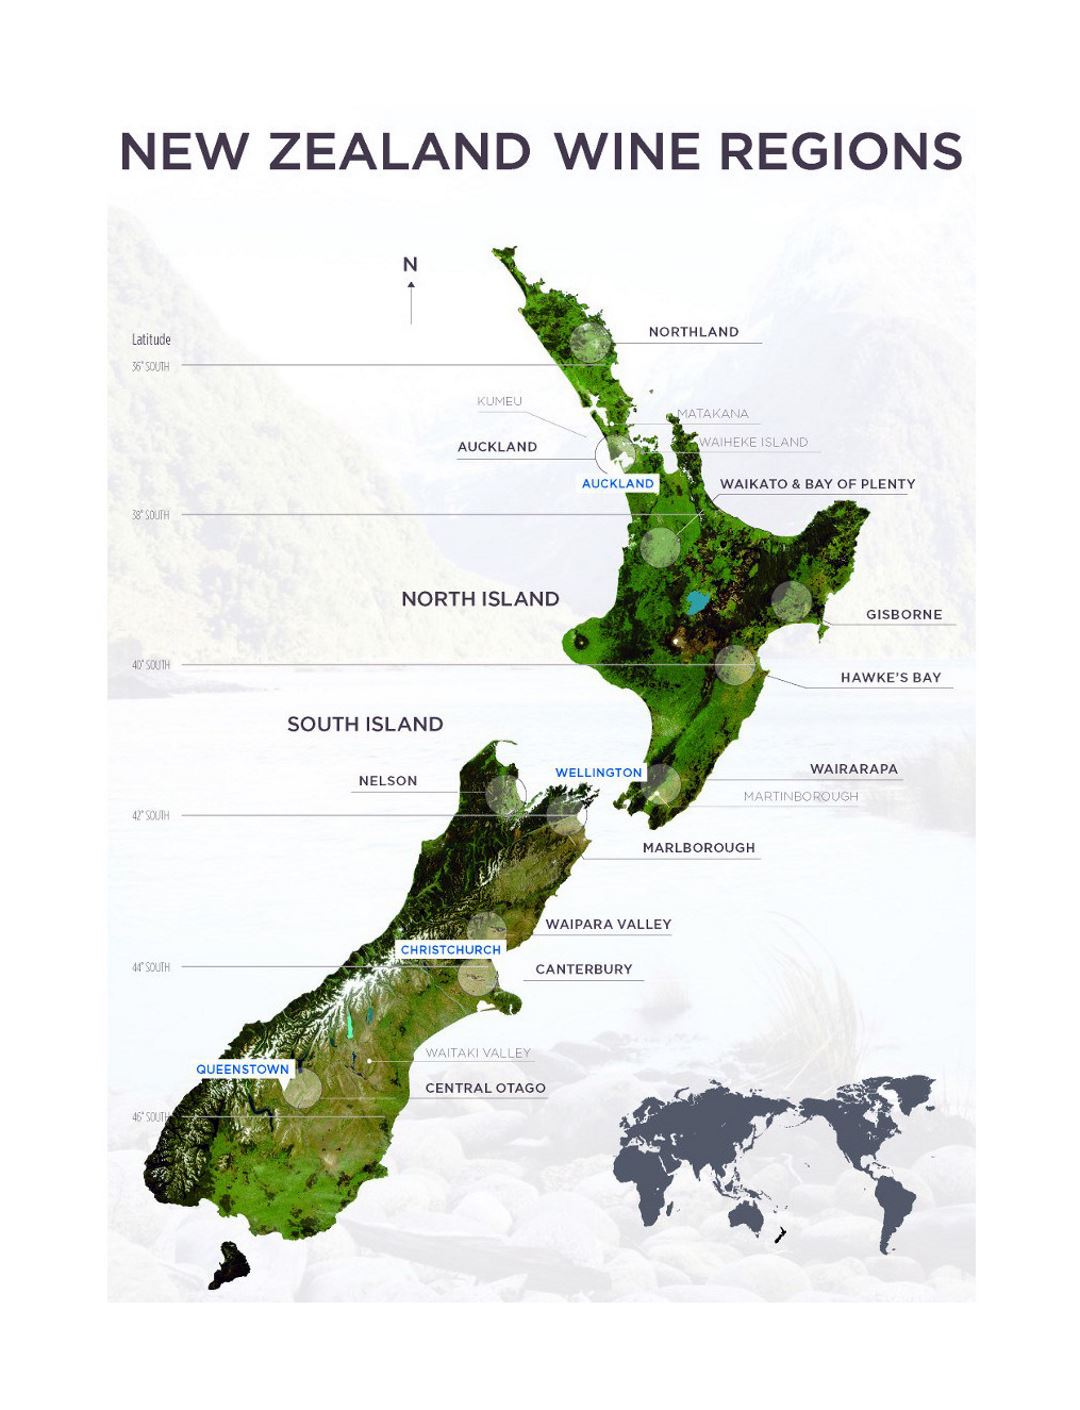 Large map of New Zealand wine regions